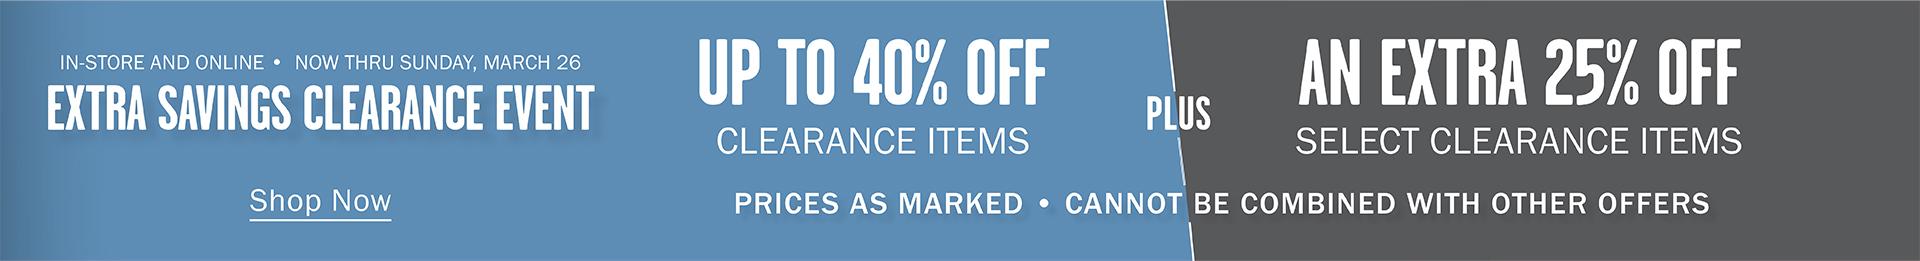 IN-STORE AND ONLINE | NOW THRU SUNDAY, MARCH 26 | EXTRA SAVINGS CLEARANCE EVENT | UP TO 40% OFF CLEARANCE ITEMS PLUS AN EXTRA 25% OFF SELECT CLEARANCE ITEMS | PRICES AS MARKED | CANNOT BE COMBINED WITH OTHER OFFERS | Shop Now